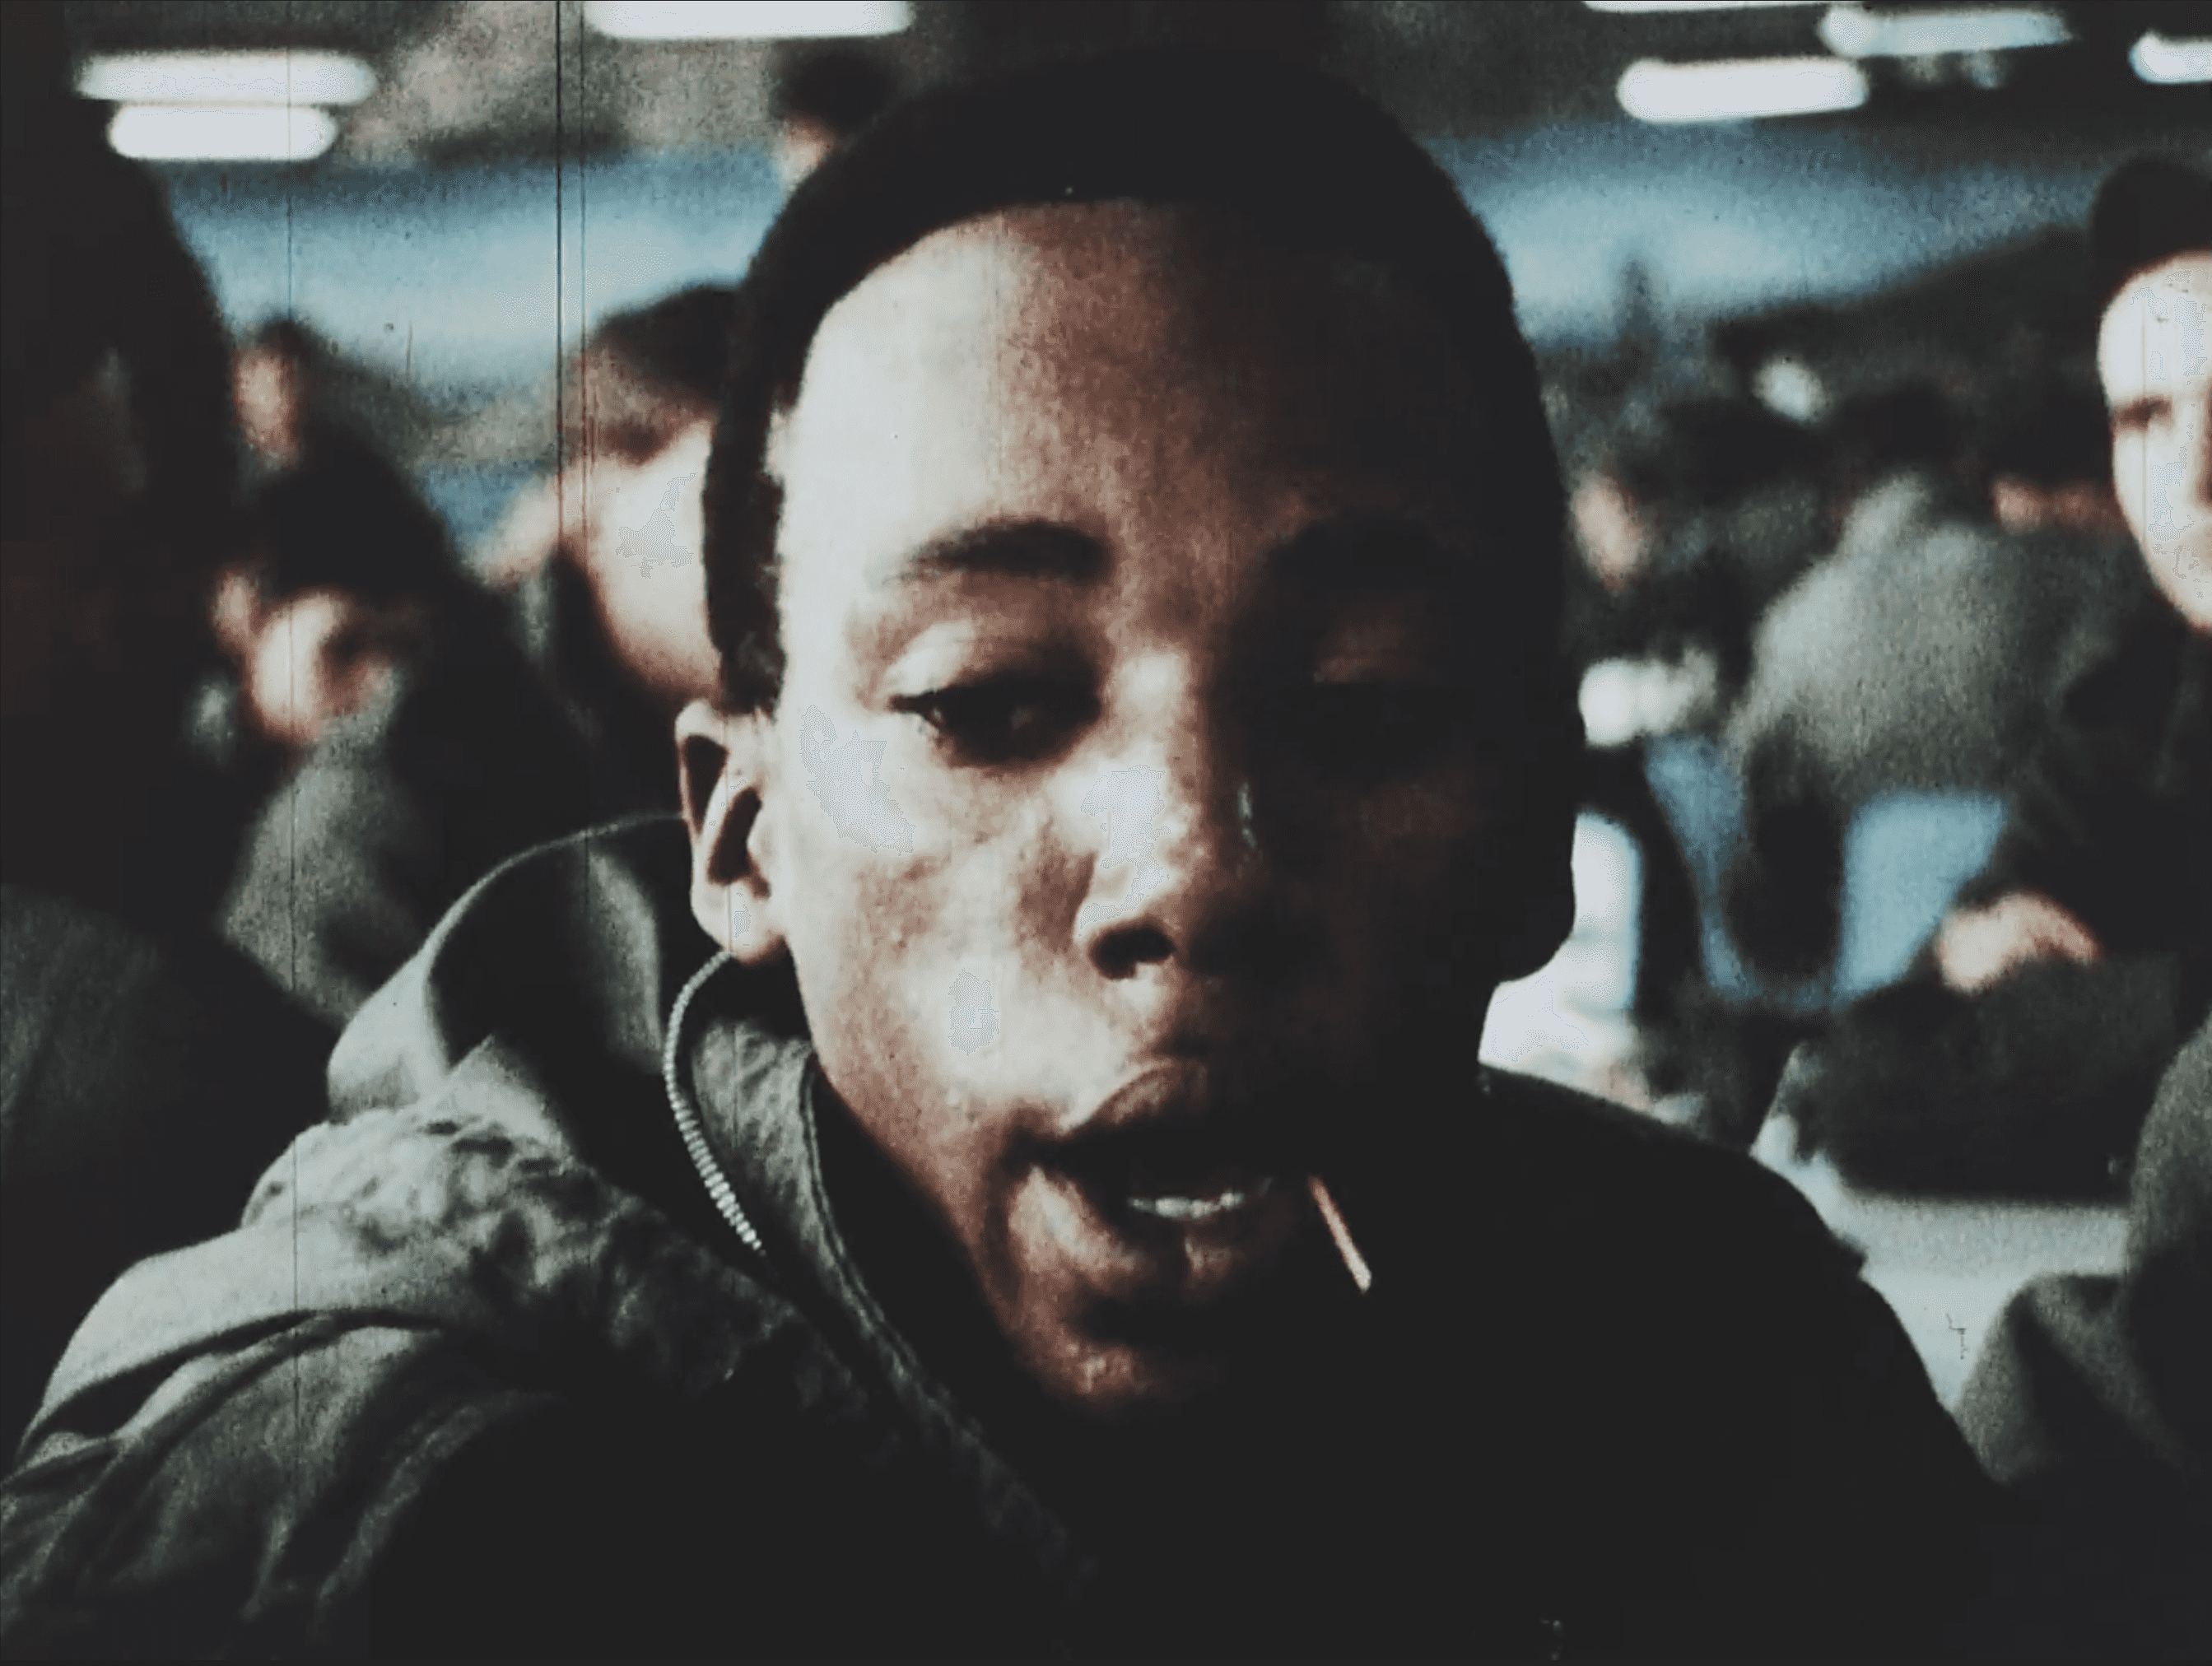 In a crowed cafeteria, a man is talking with a toothpick in his mouth.